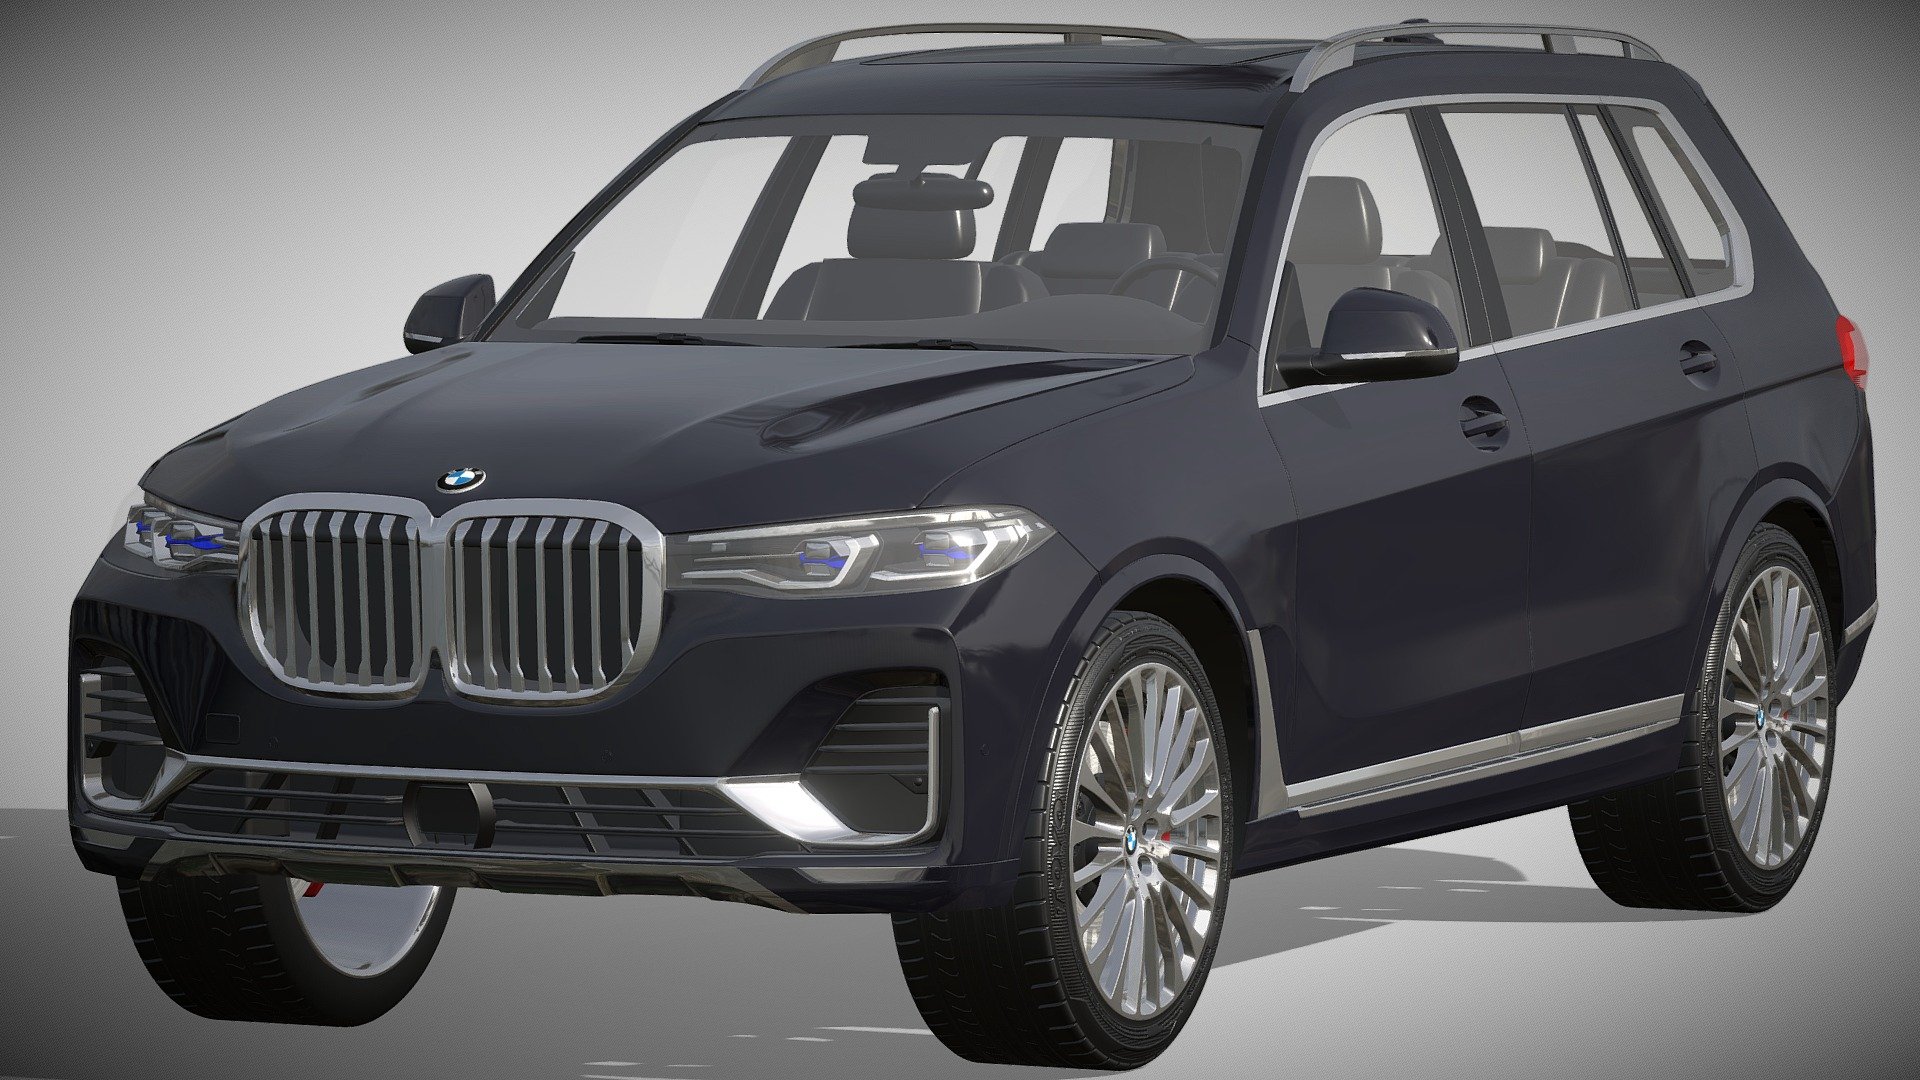 BMW X7

https://www.bmw.com/en/bmw-models/x7.html

Clean geometry Light weight model, yet completely detailed for HI-Res renders. Use for movies, Advertisements or games

Corona render and materials

All textures include in *.rar files

Lighting setup is not included in the file! - BMW X7 - Buy Royalty Free 3D model by zifir3d 3d model